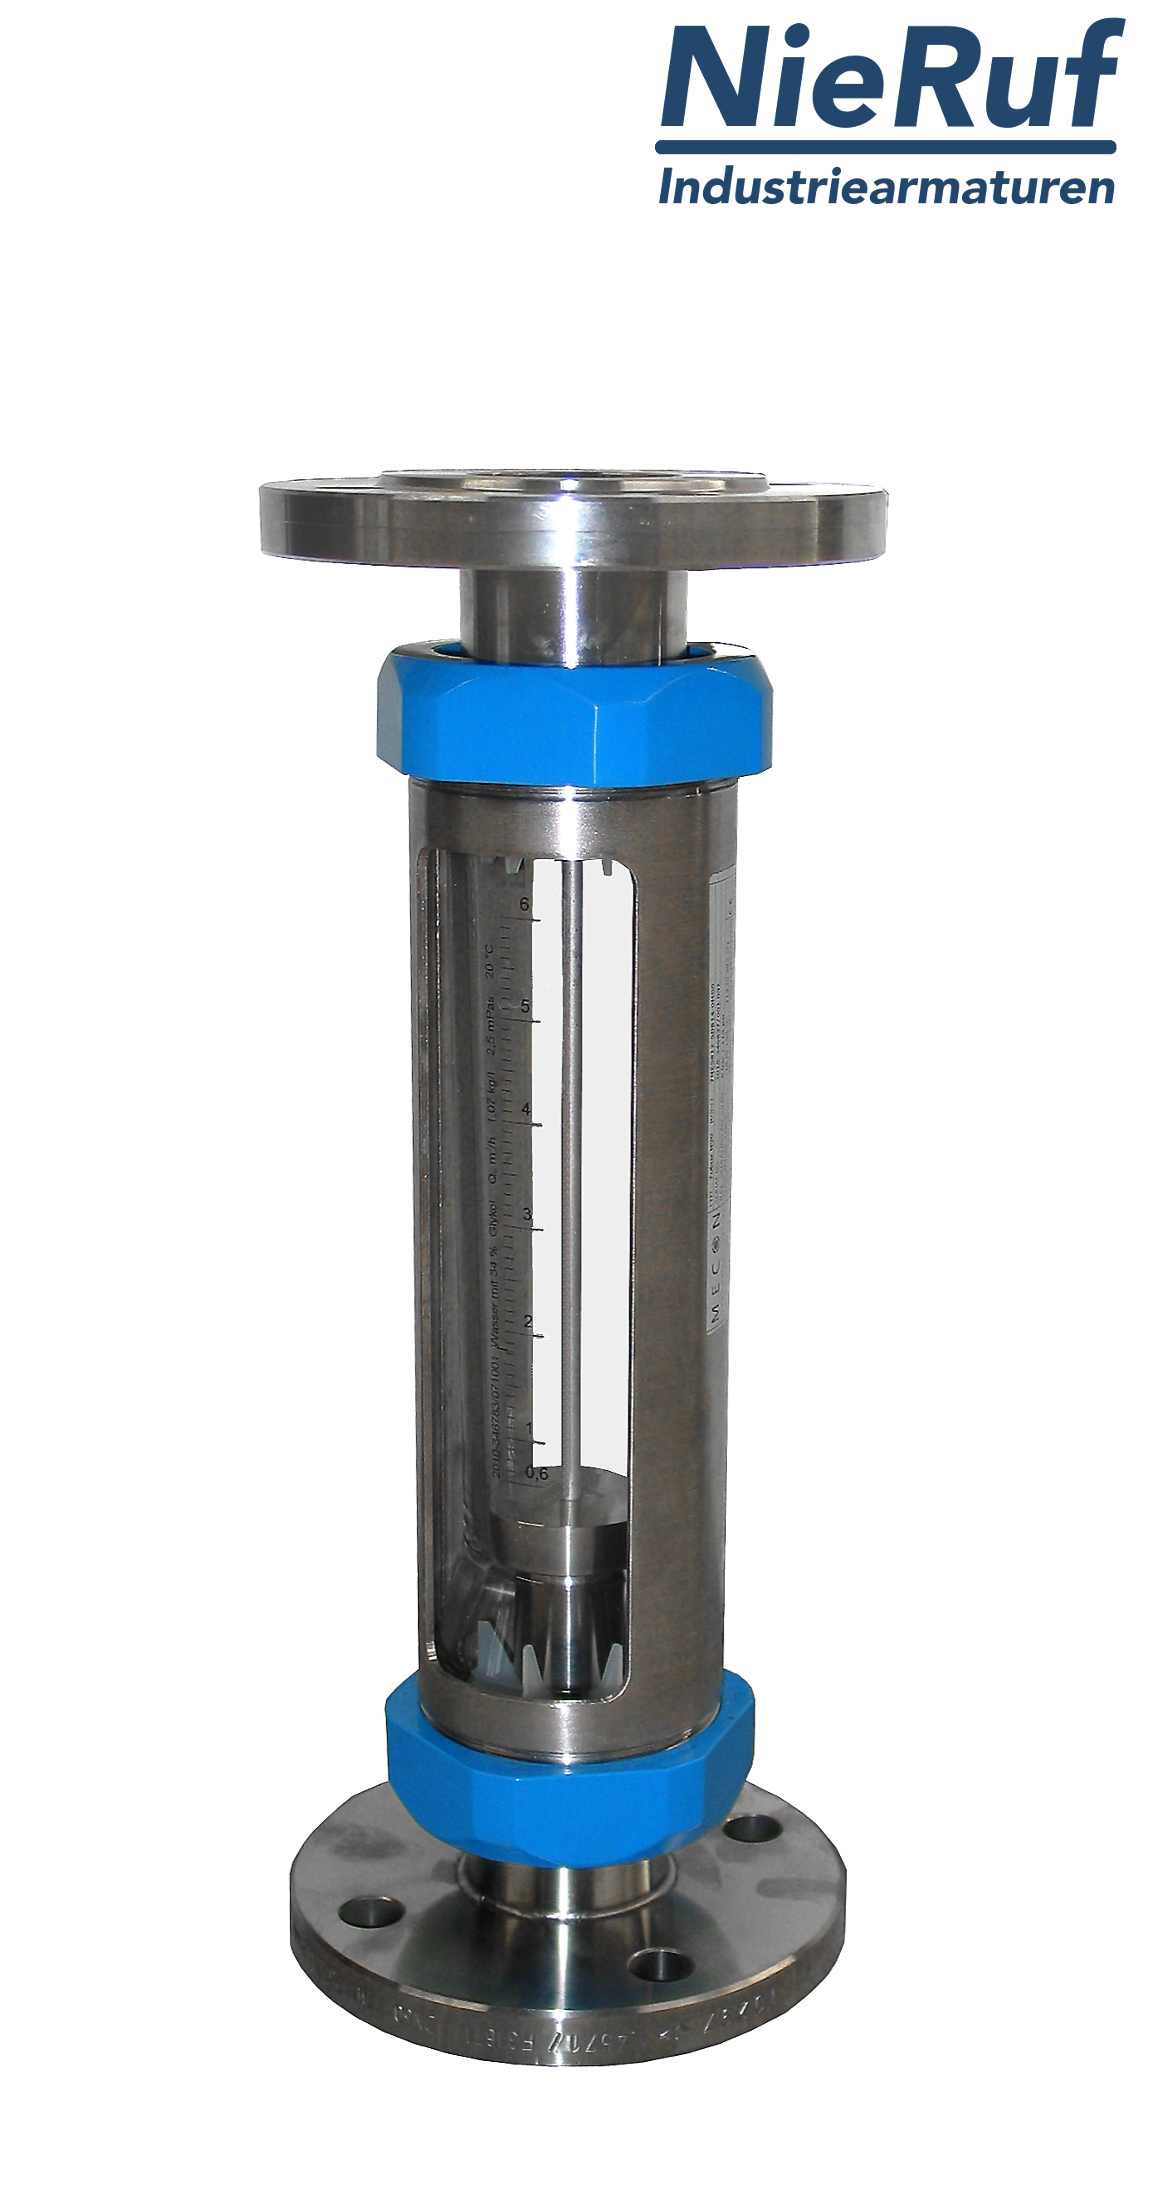 Variable area flowmeter stainless steel + borosilicate flange DN20 10.0 - 100.0 l/h water FKM